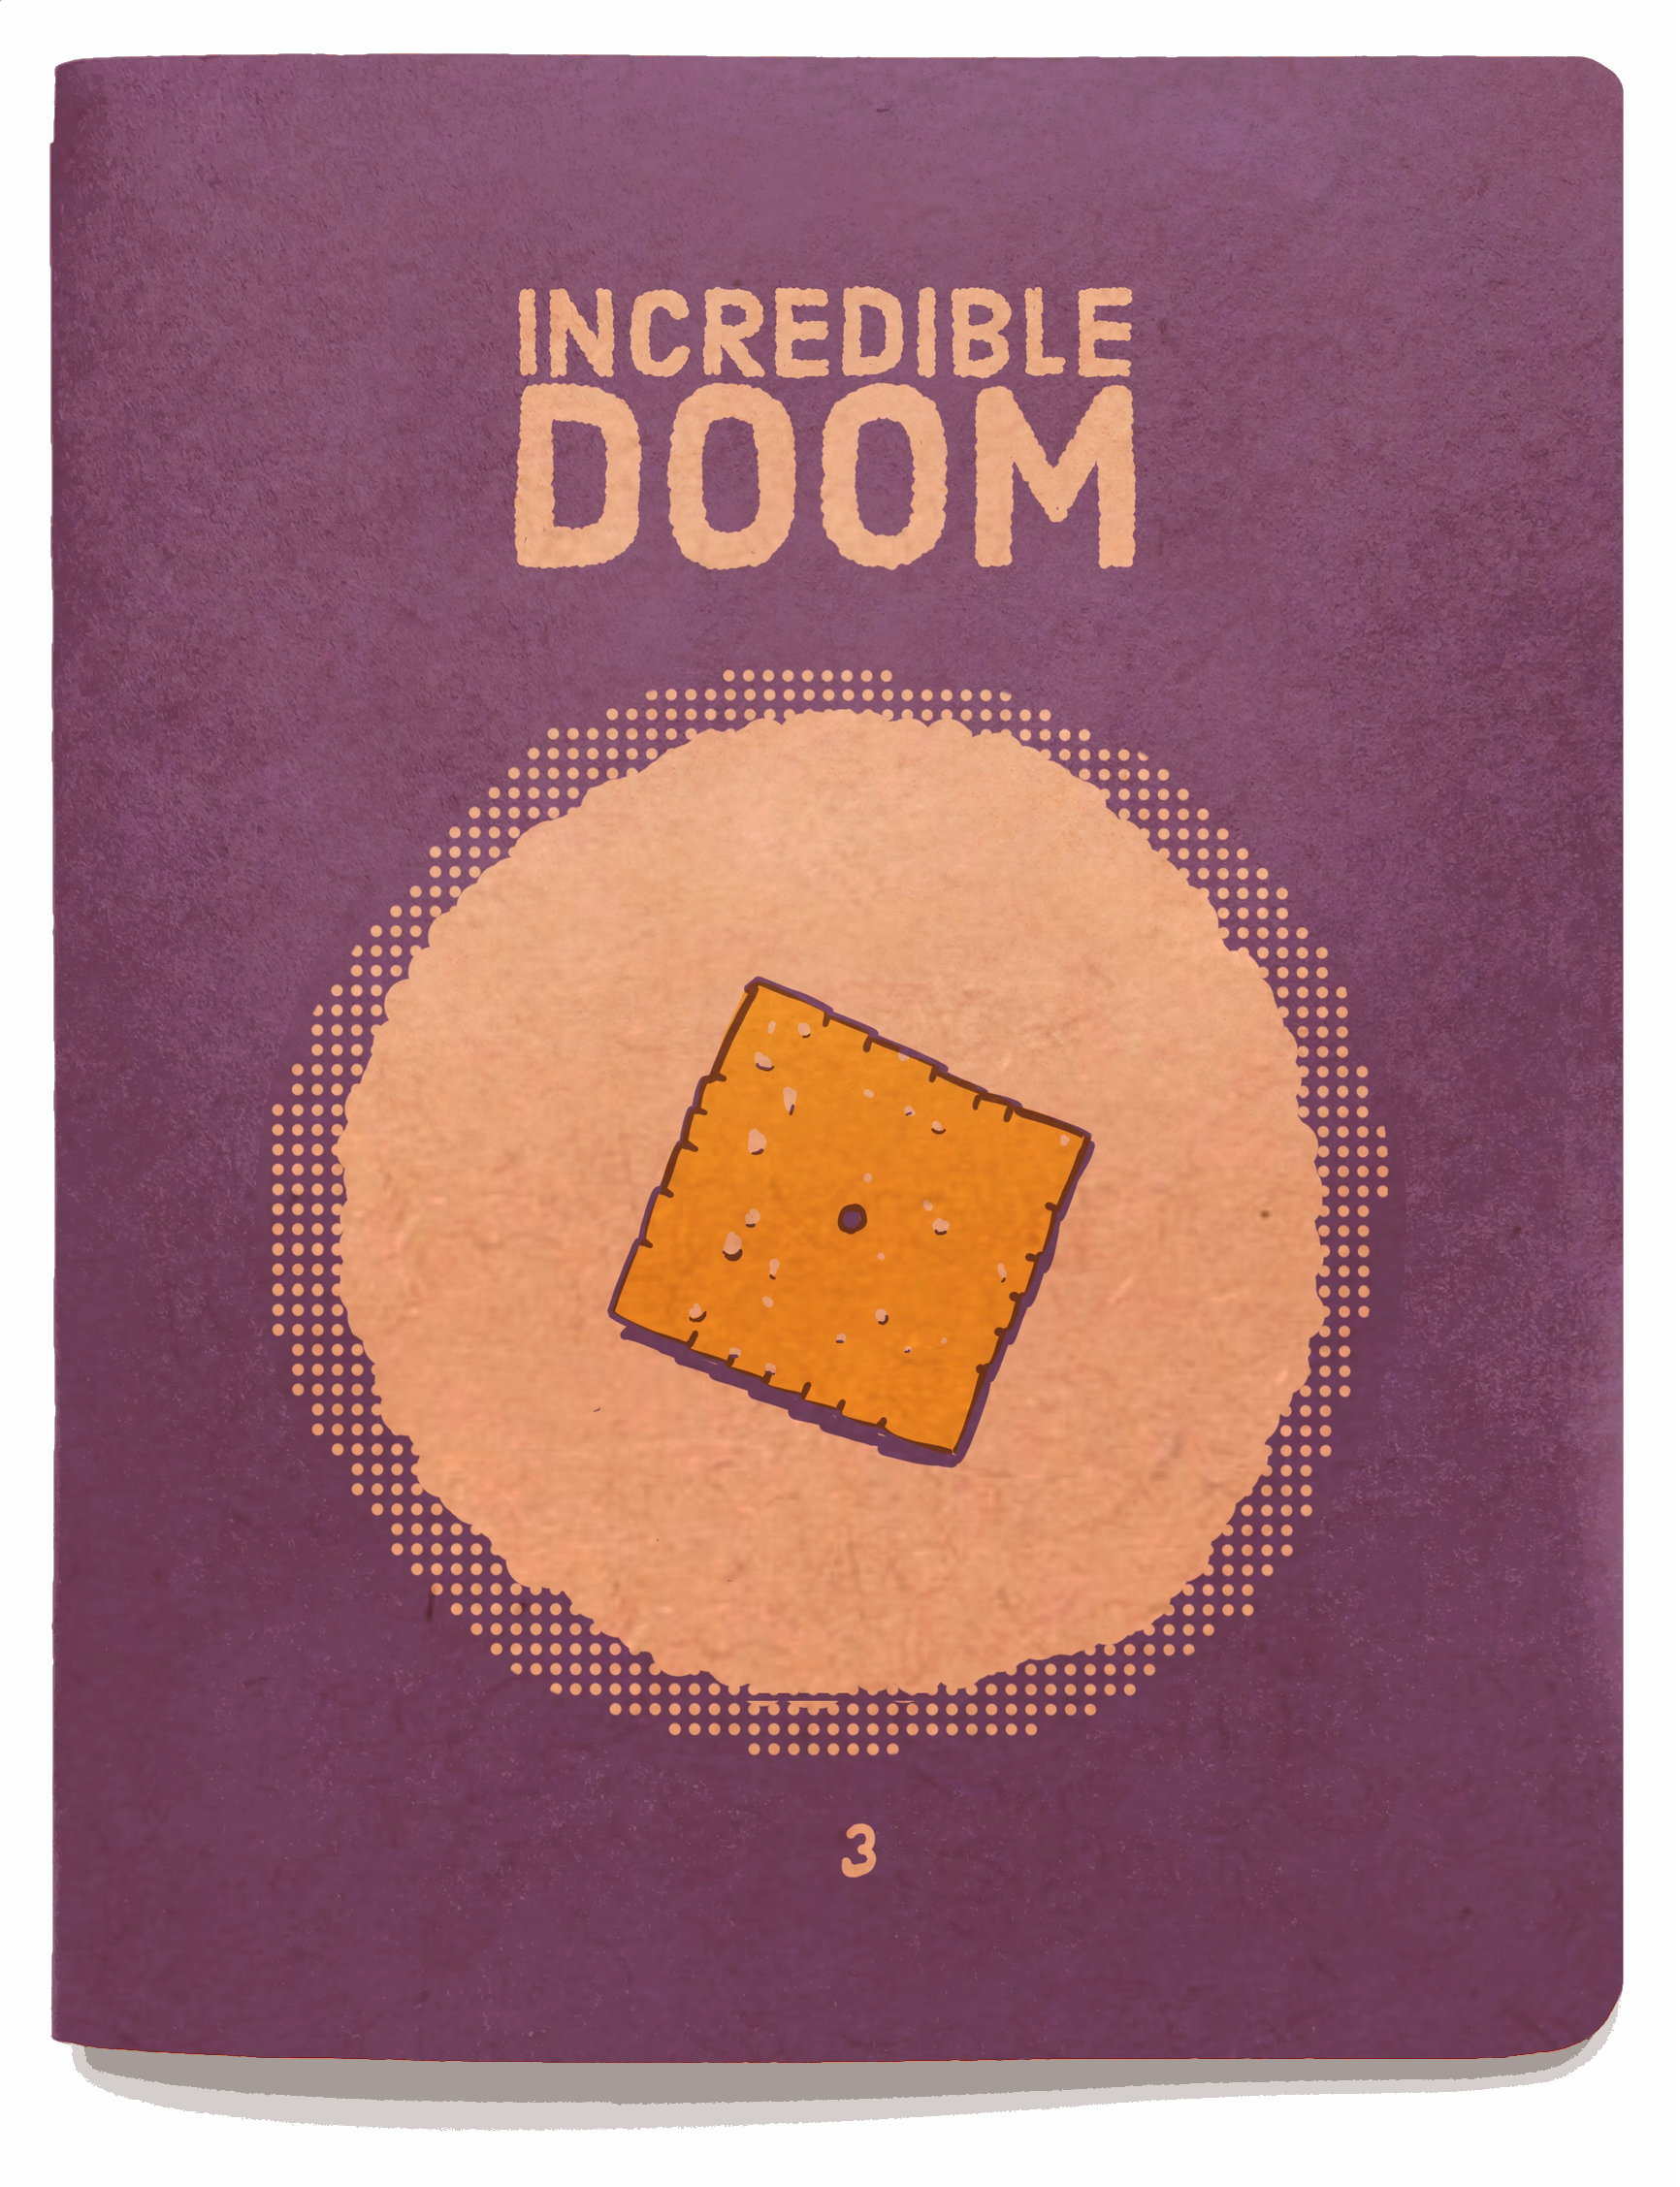 Incredible Doom #03 - Cover on white background.png